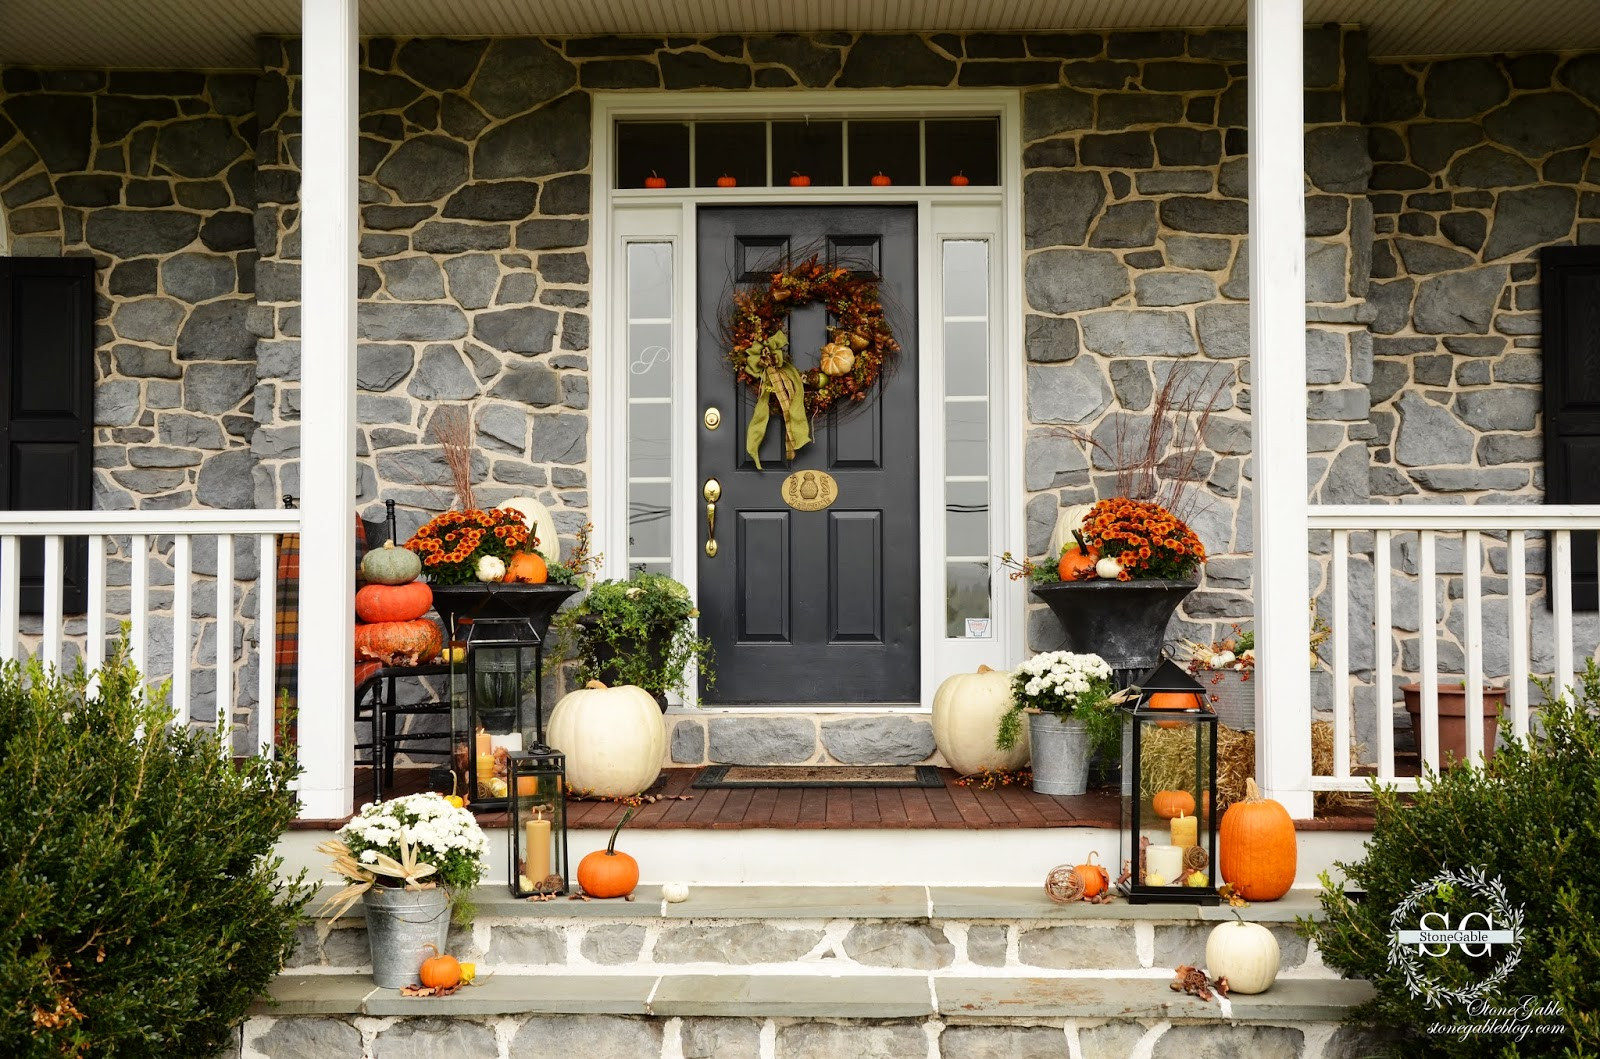 Fall Decorations Front Porch
 FALL ON THE FRONT PORCH StoneGable